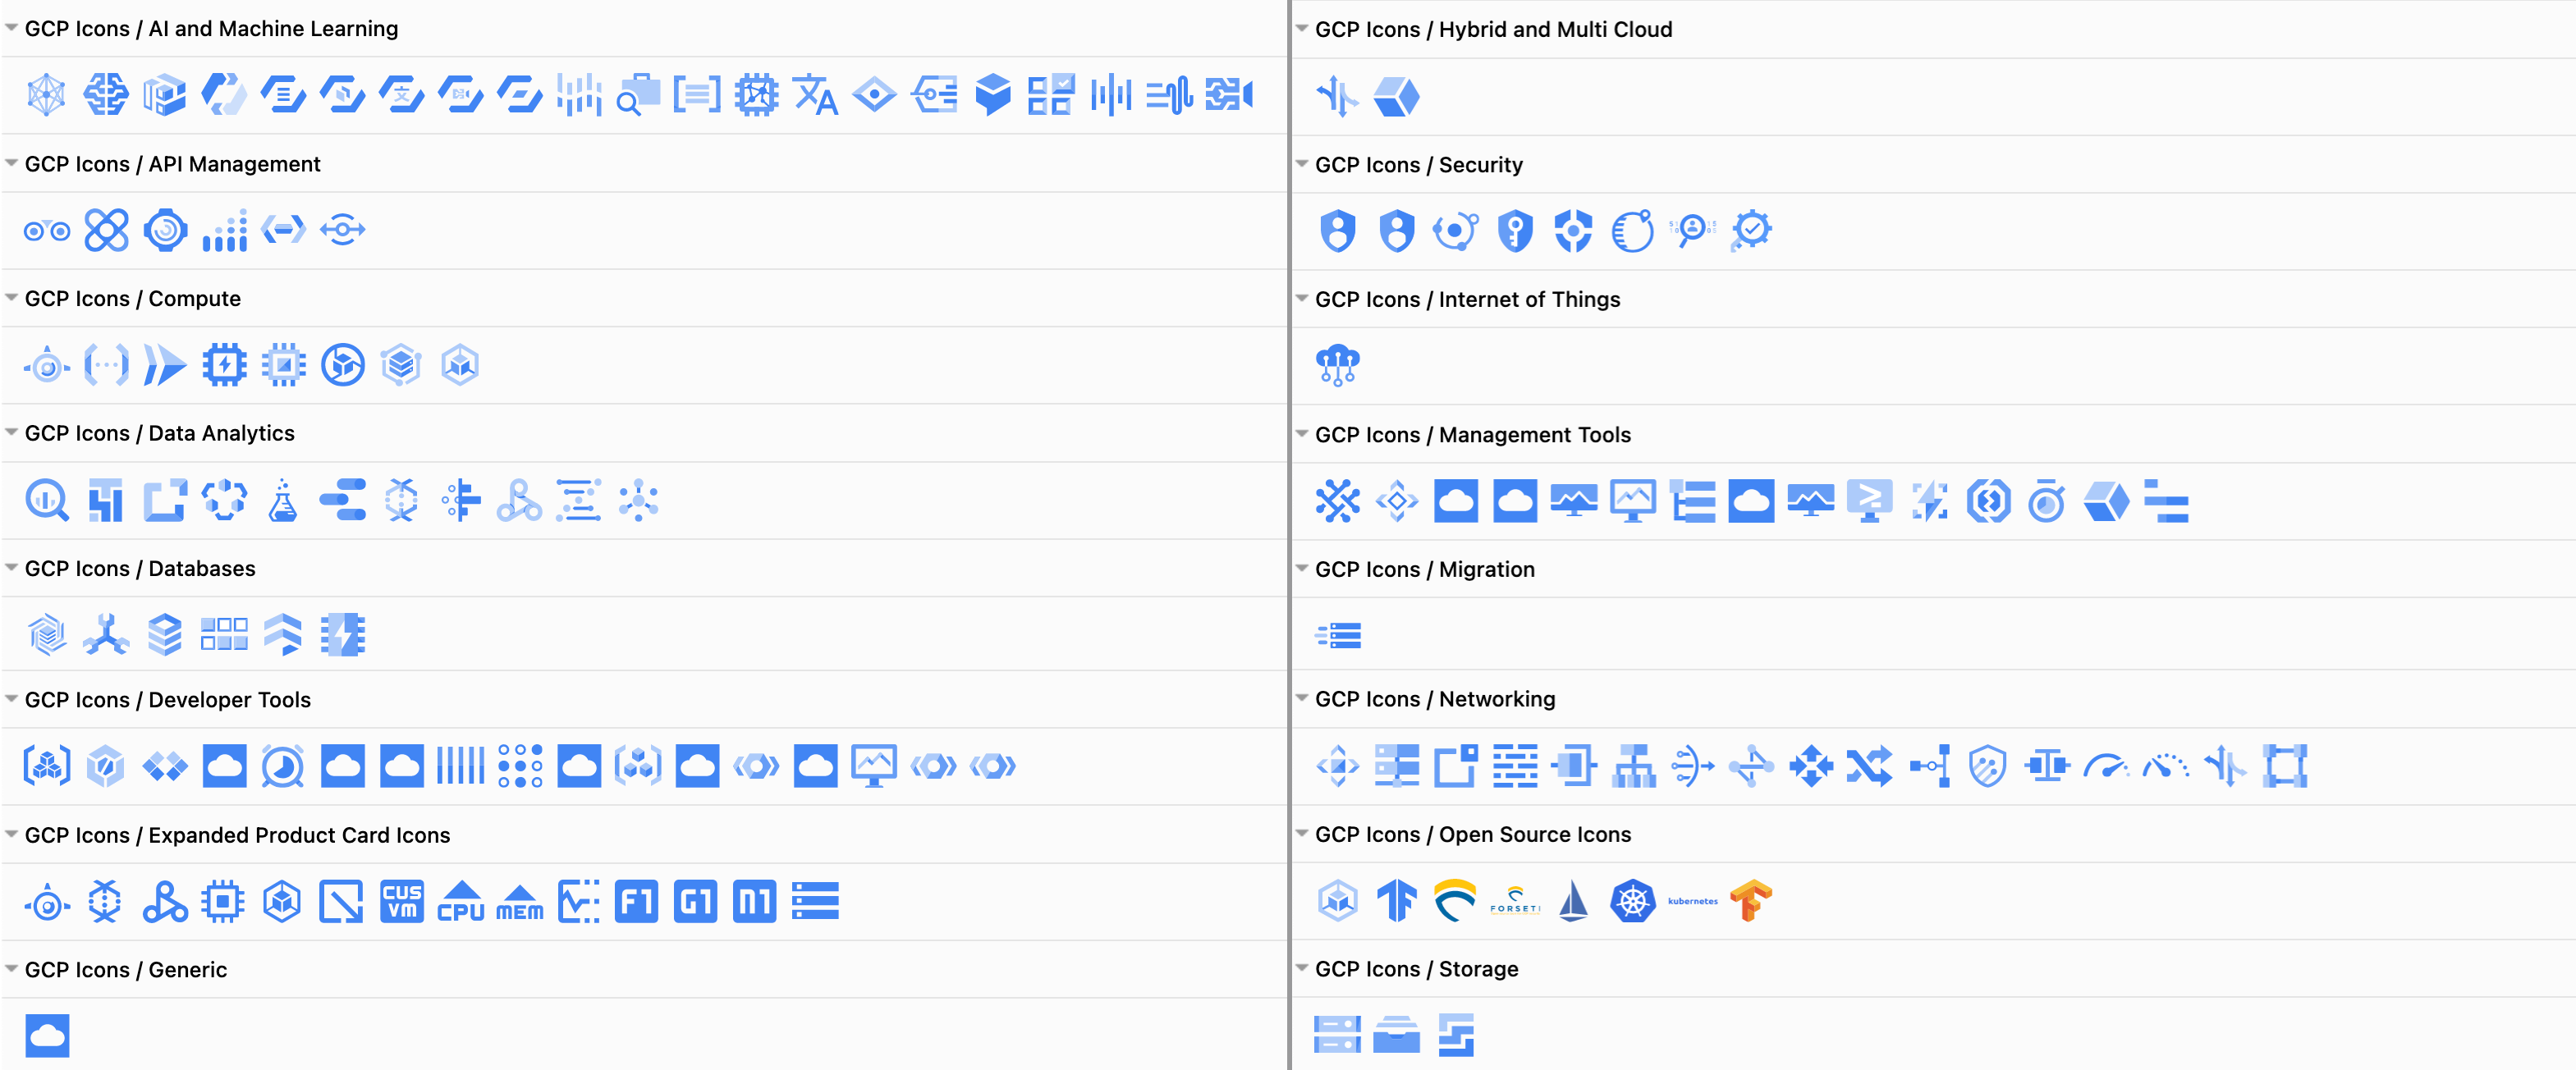 The GCP icons shape library for Google Cloud Platform infrastructure diagrams has been updated in diagrams.net